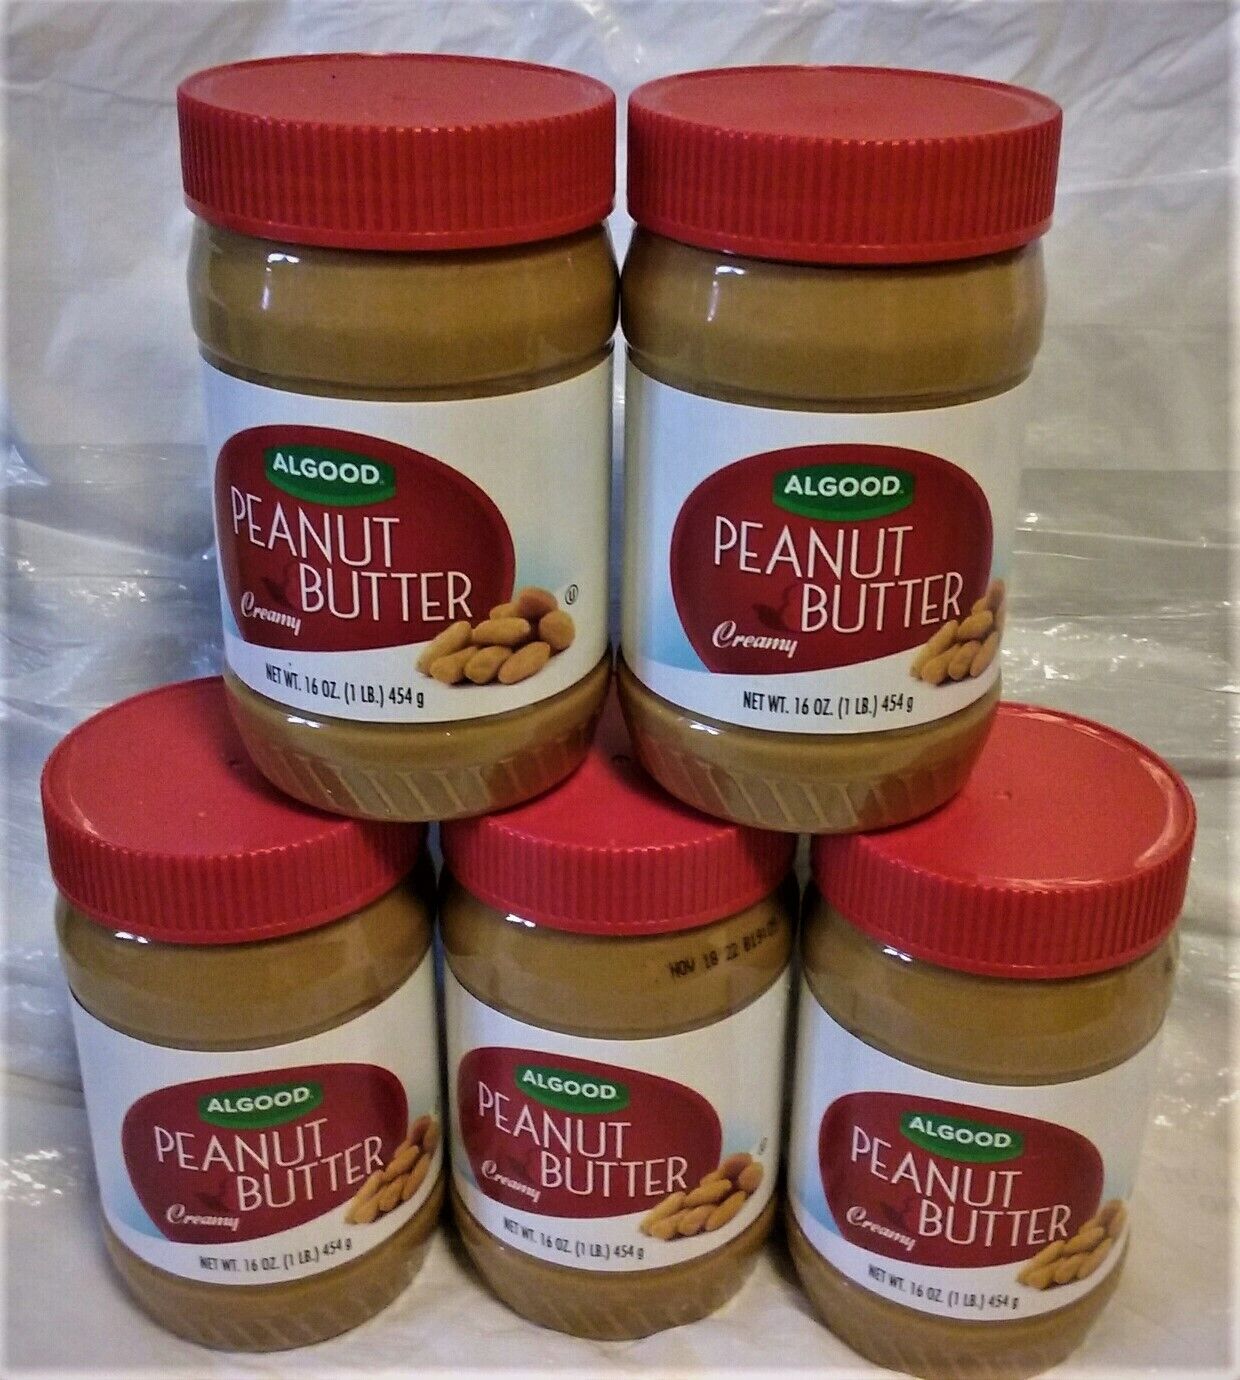 Algood Creamy Style Peanut Butter, 5 one pound jars sold in one